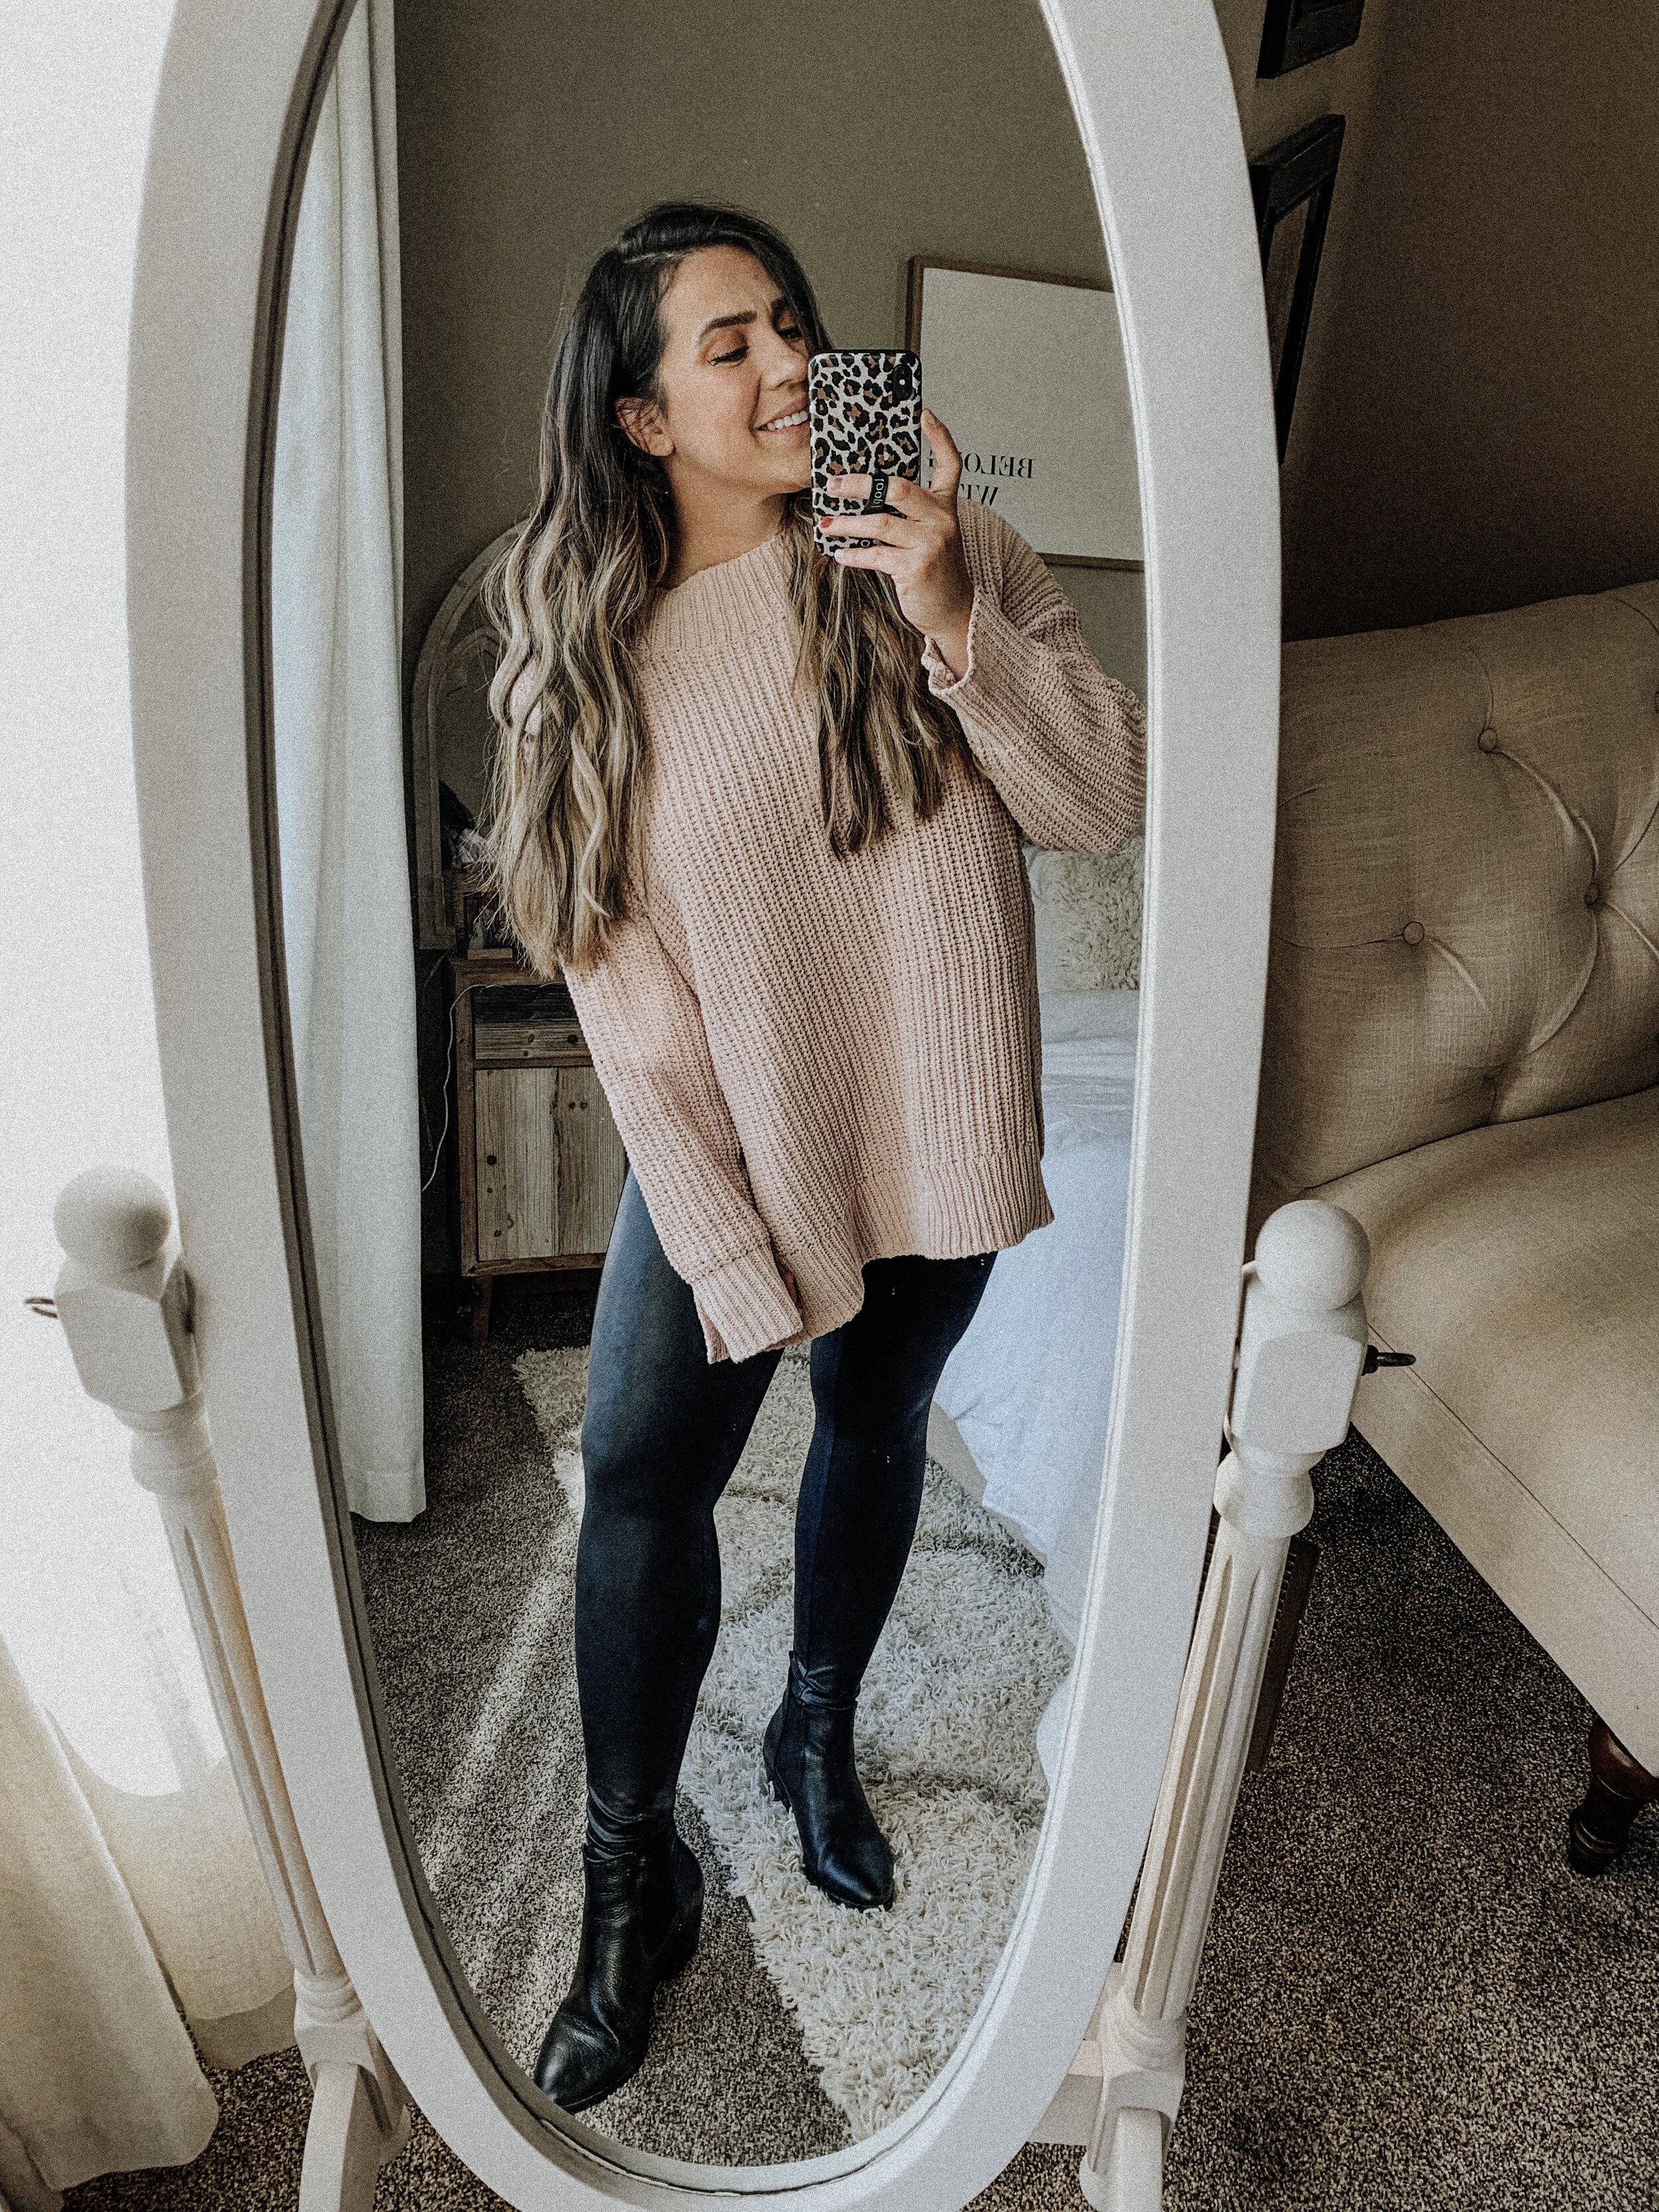 Spanx leggings outfit